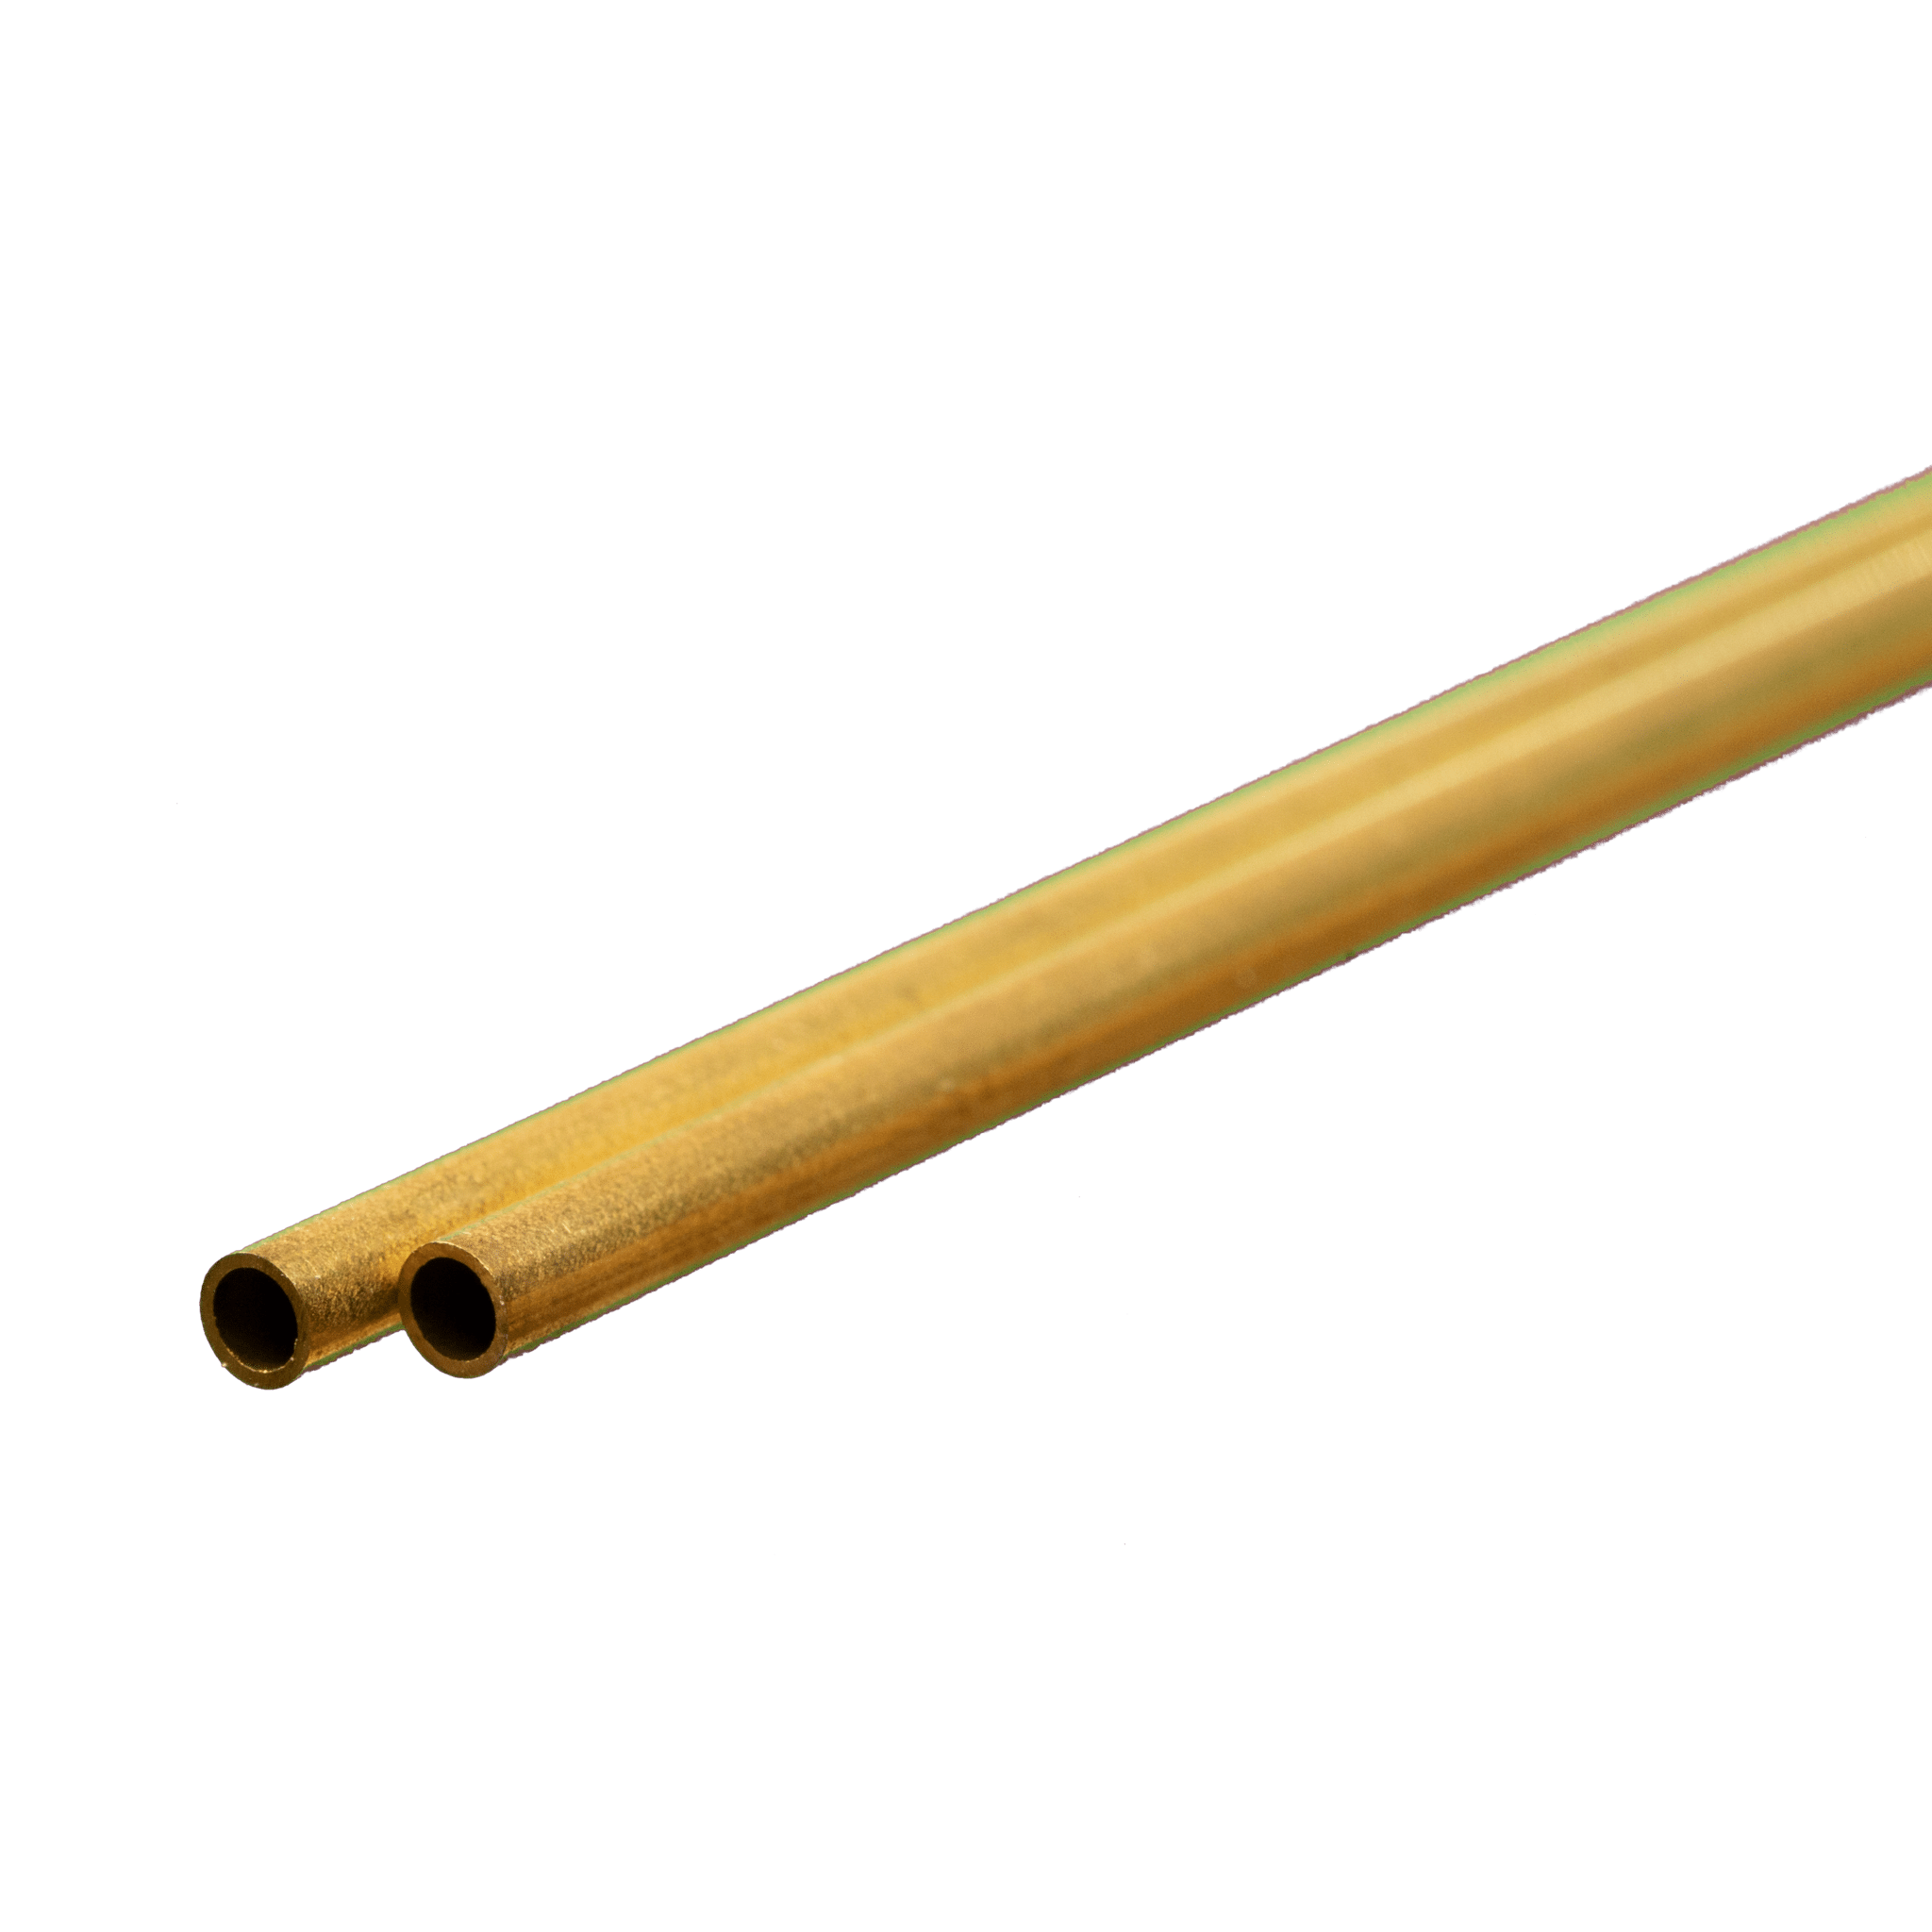 K&S Metals 8121 Brass Fuel Tube 1/8" OD x 0.014" Wall x 12" Long (2 Pieces)